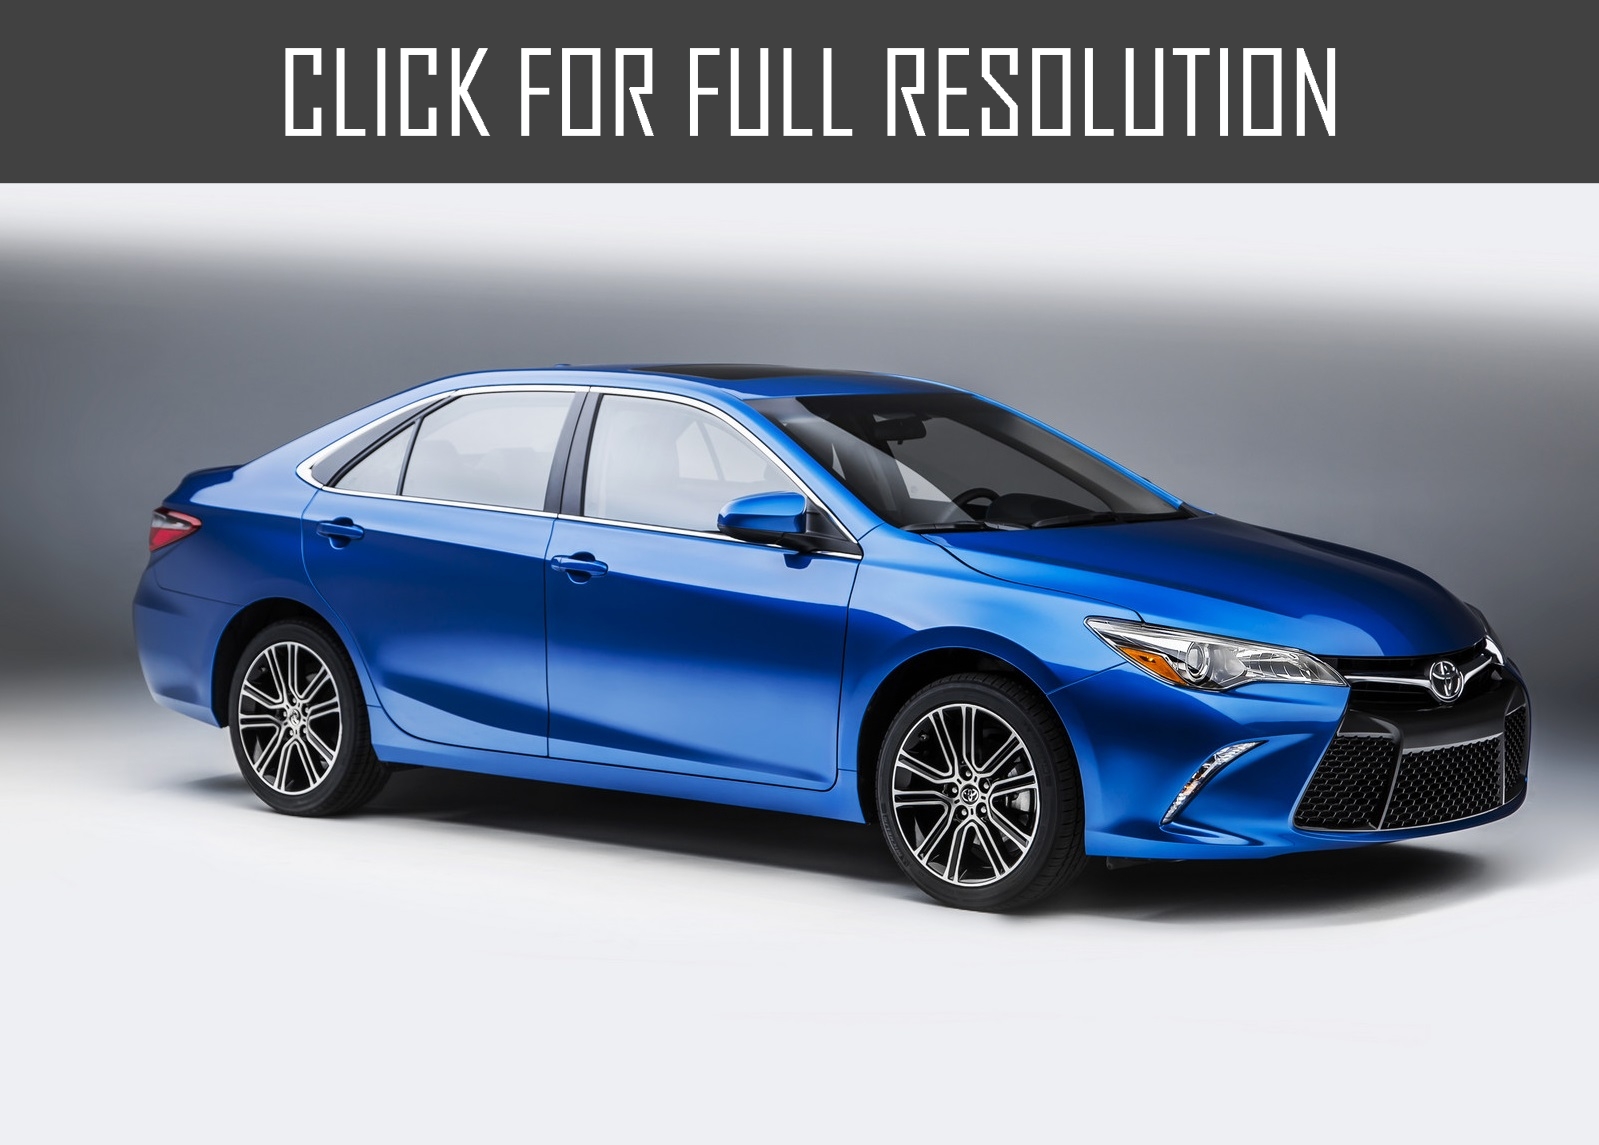 2018 Toyota Camry Redesign